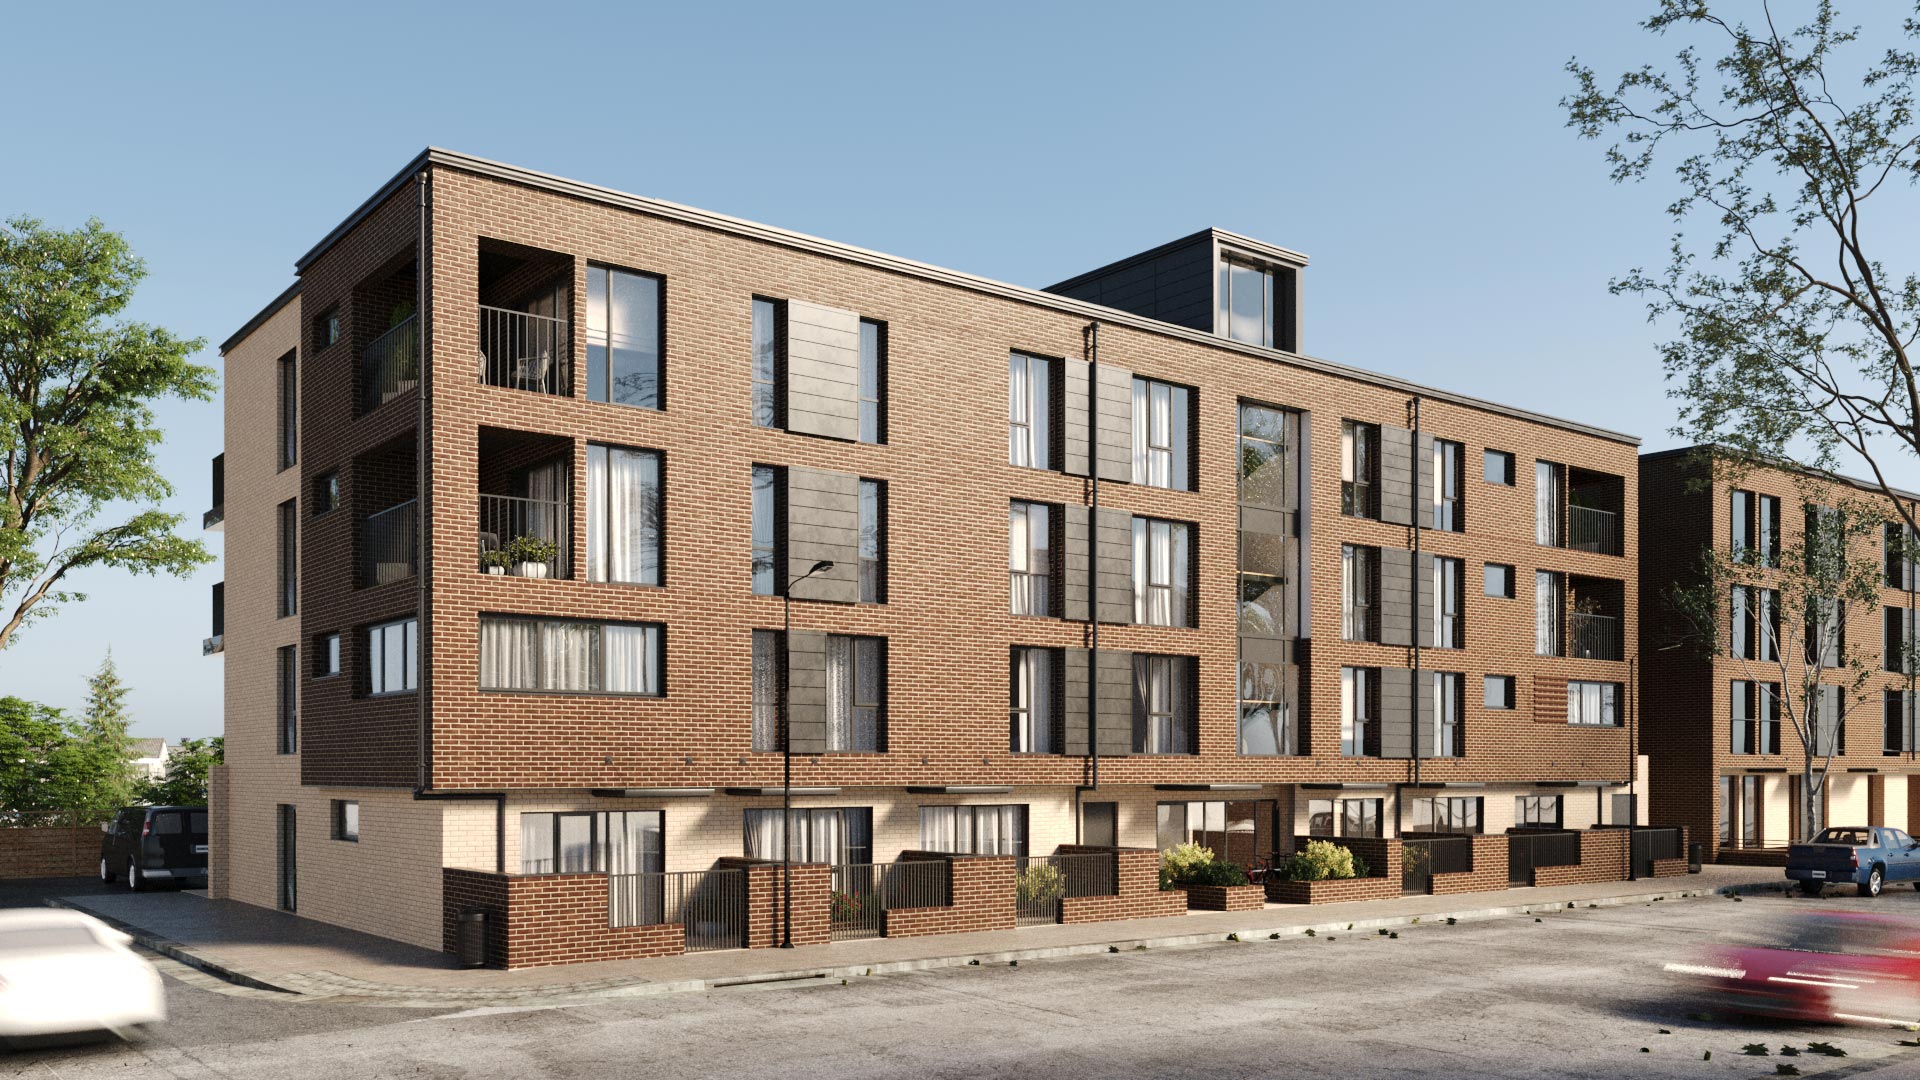 Henshall & Partners brokers affordable homes acquisition deal